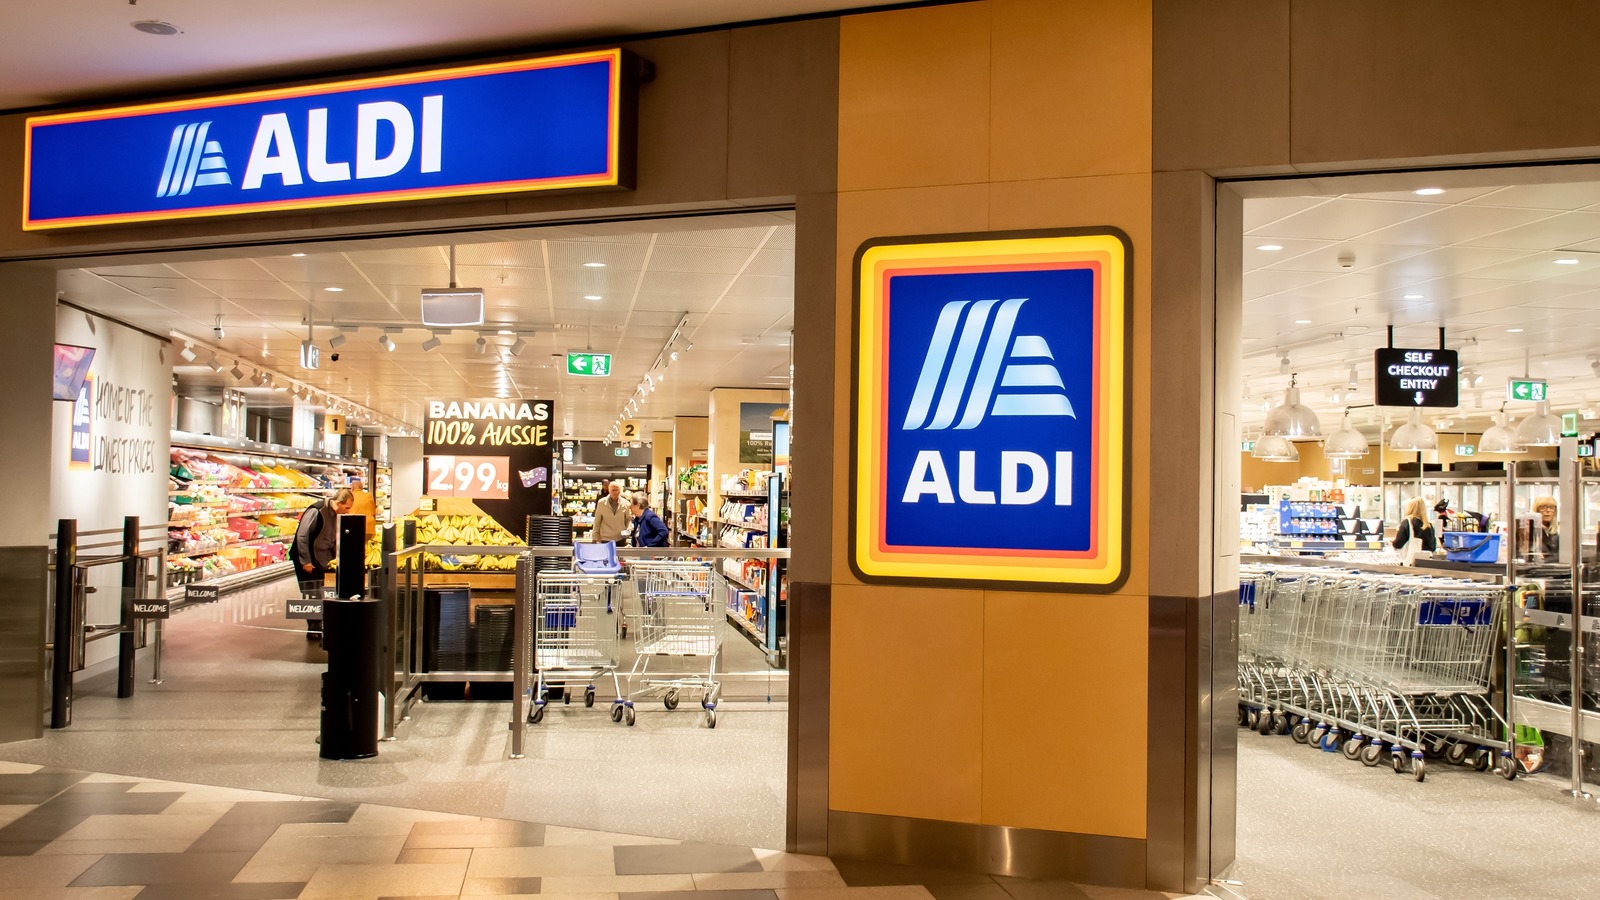 https://www.thedailymeal.com/img/gallery/heres-what-you-should-buy-on-your-first-trip-to-aldi/l-intro-1679964458.jpg